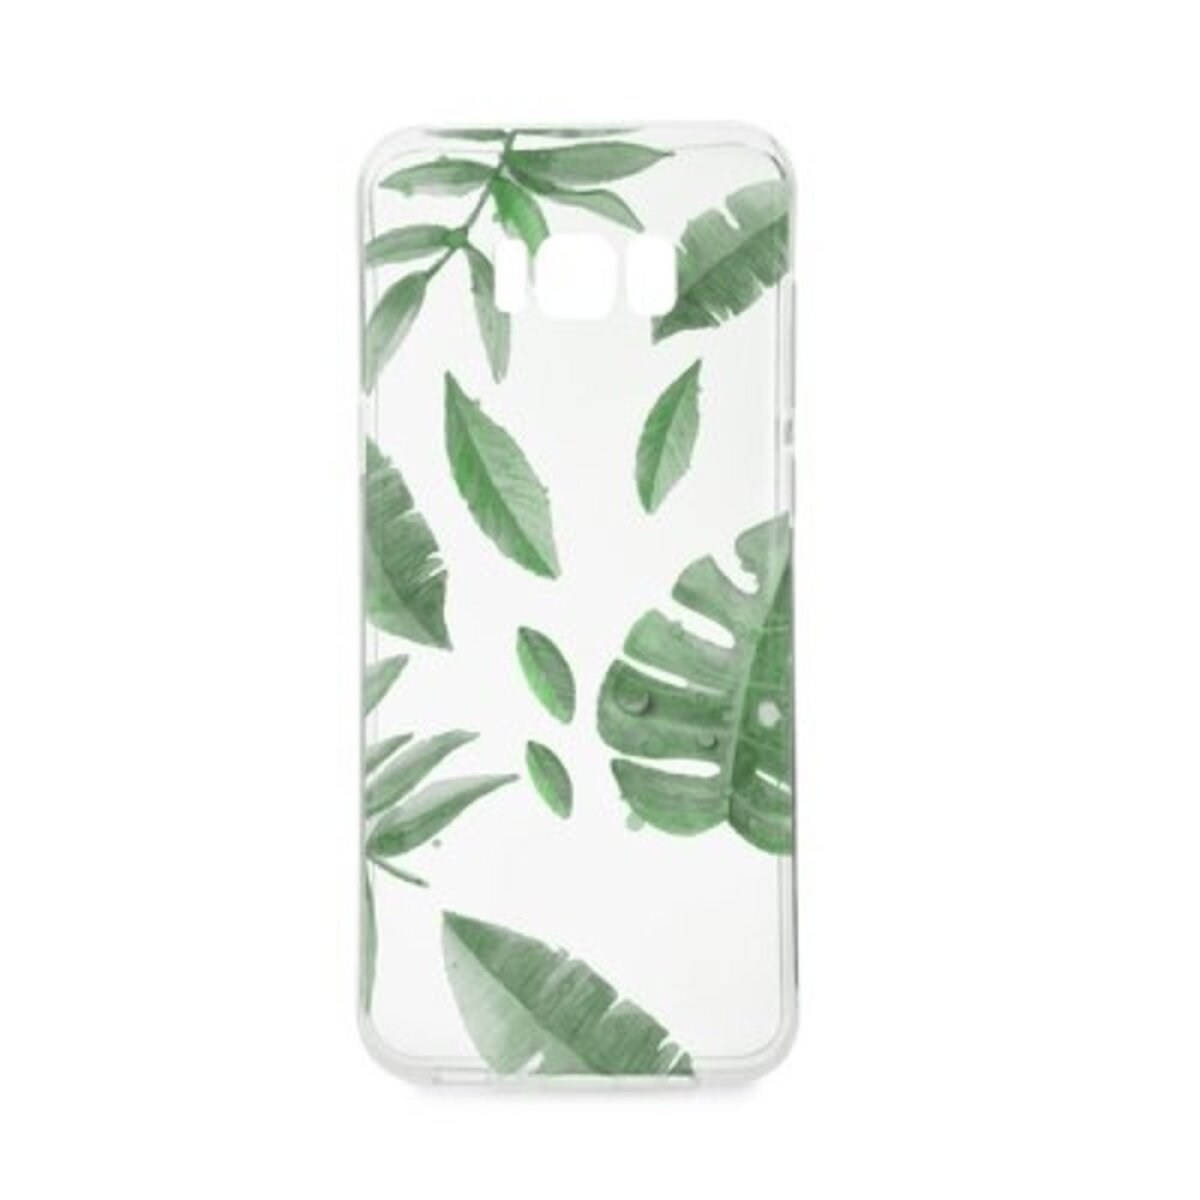 P20 Summer Tropico Bookcover, Not FORCELL Backcase lite, Universal, available Universal,